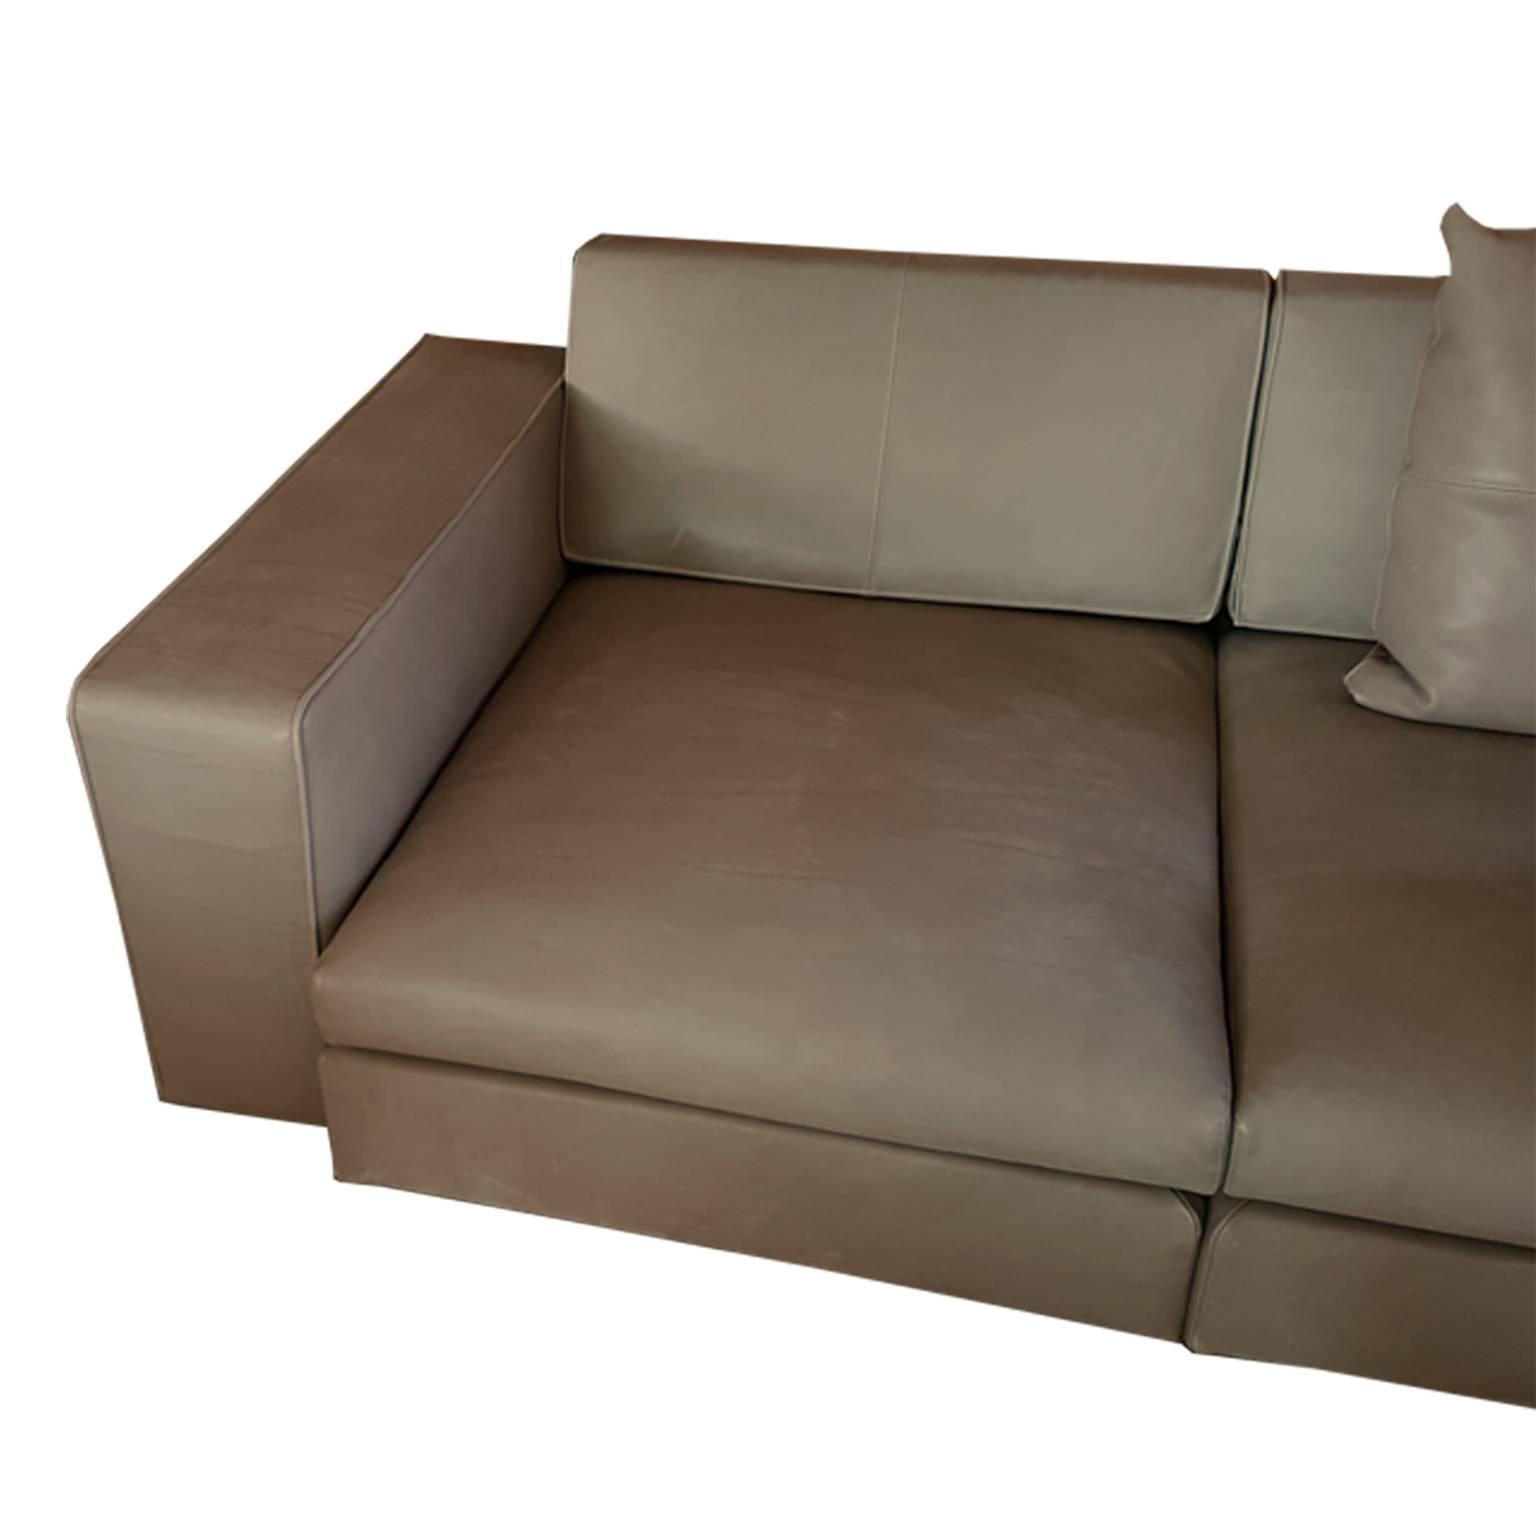 Other Italian Contemporary Natural Leather Large Molteni Sofa with Double Dept For Sale